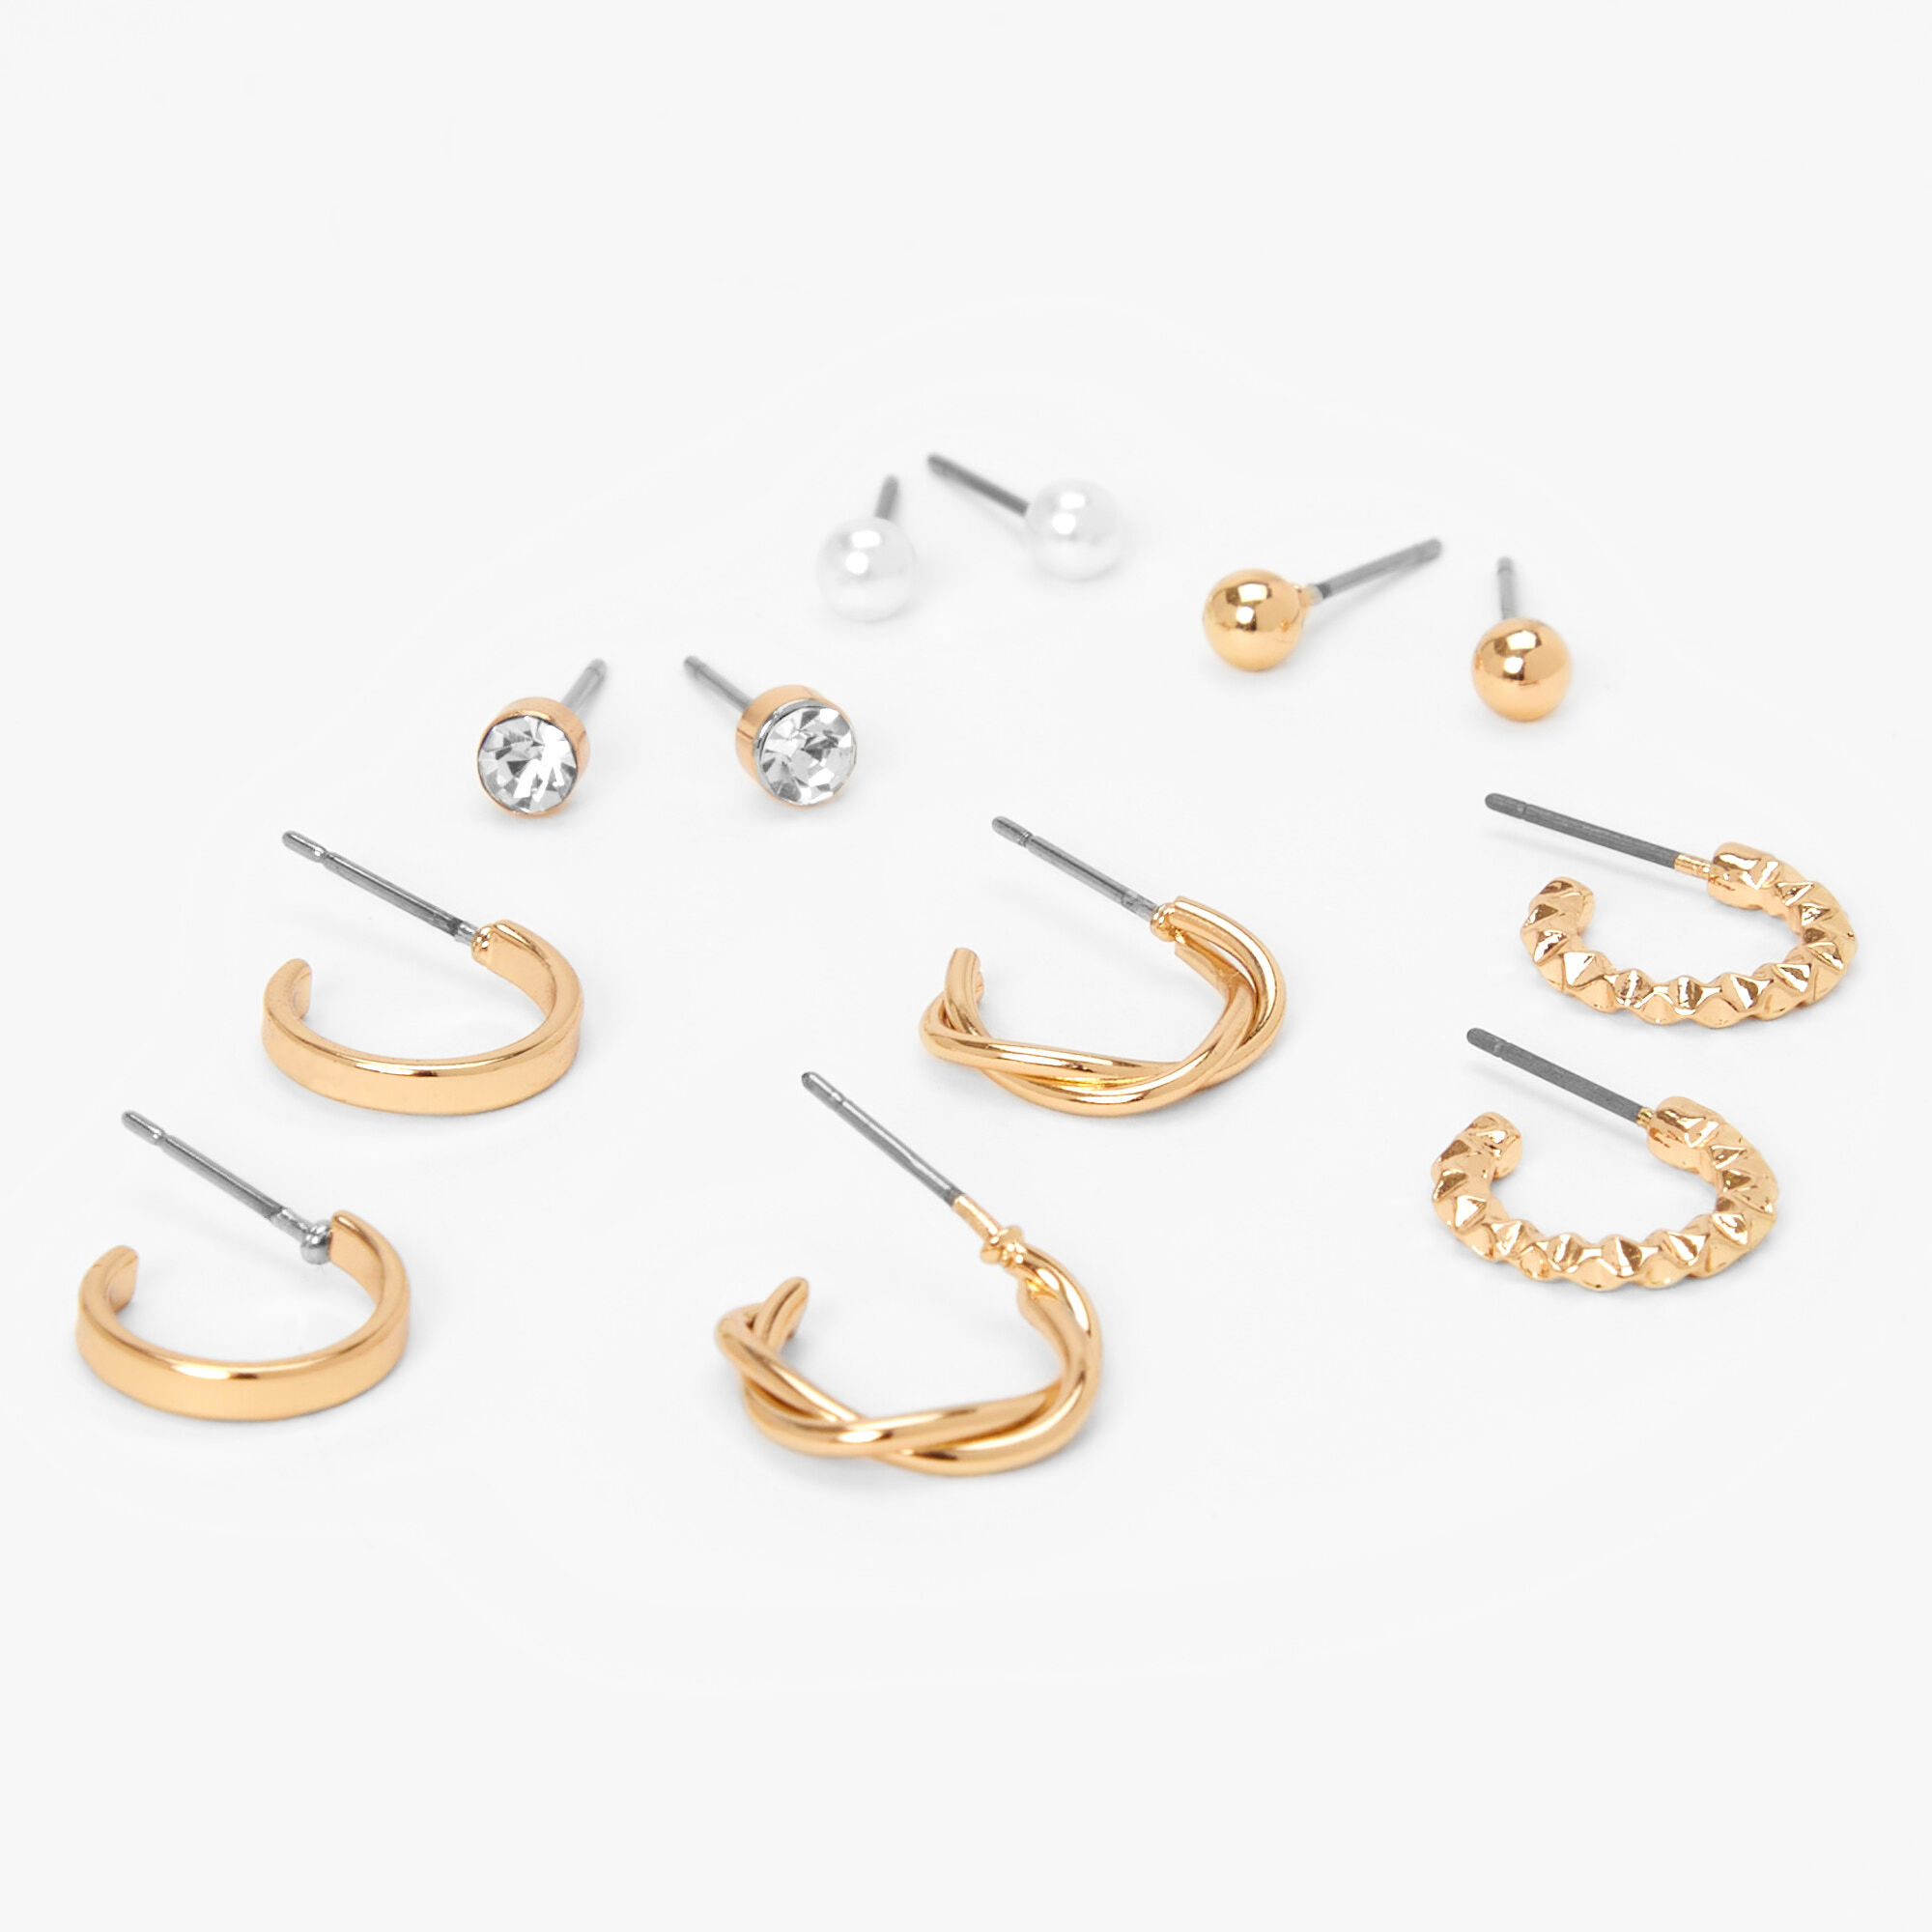 View Claires Tone Textured Earrings Set 6 Pack Gold information